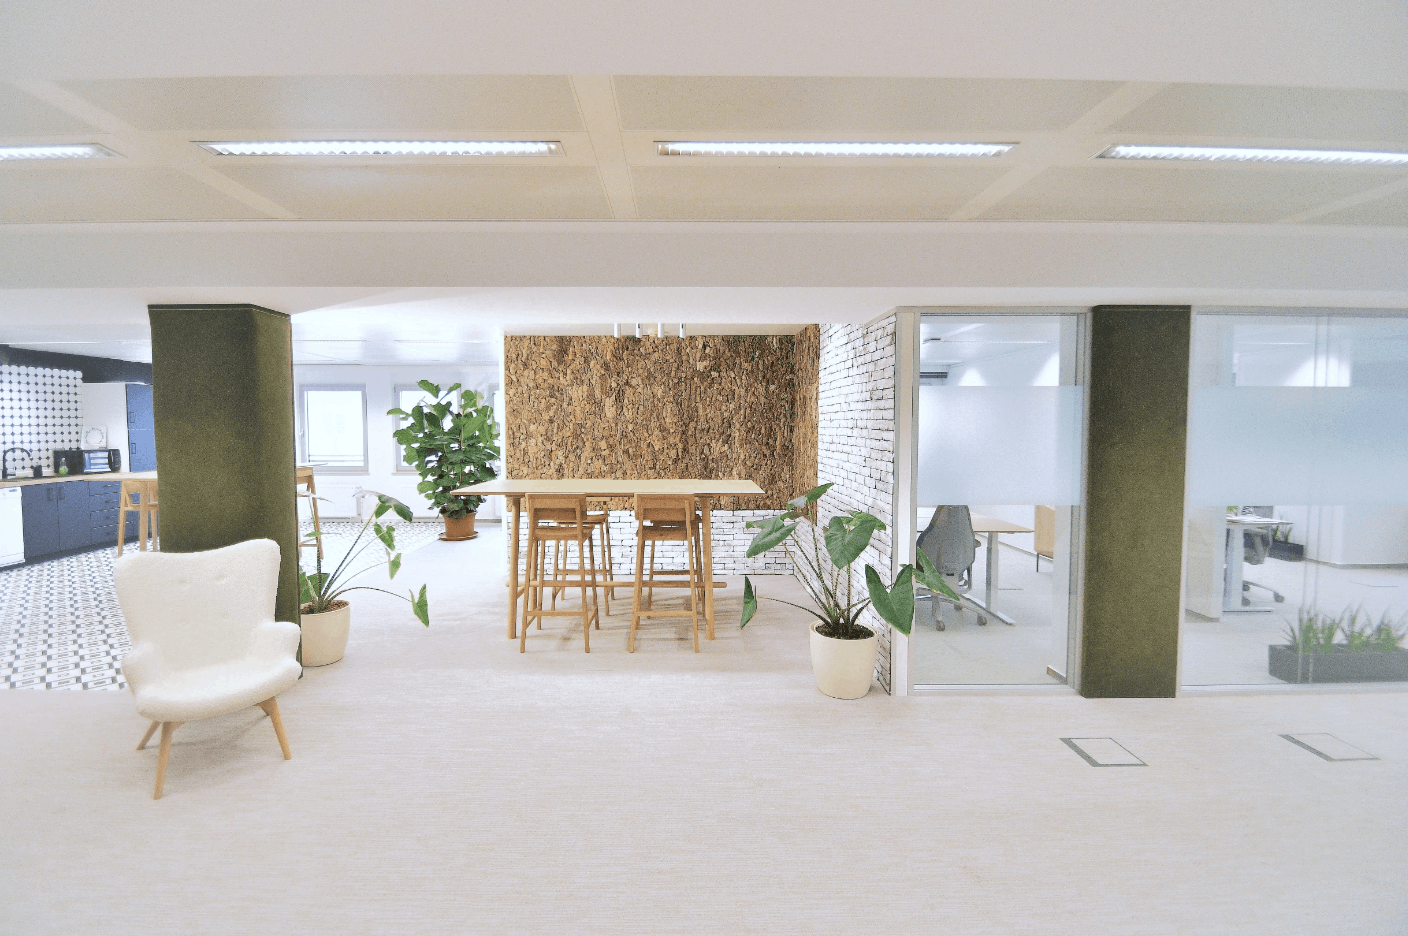 View of The Office spaces (Photo: The Office)